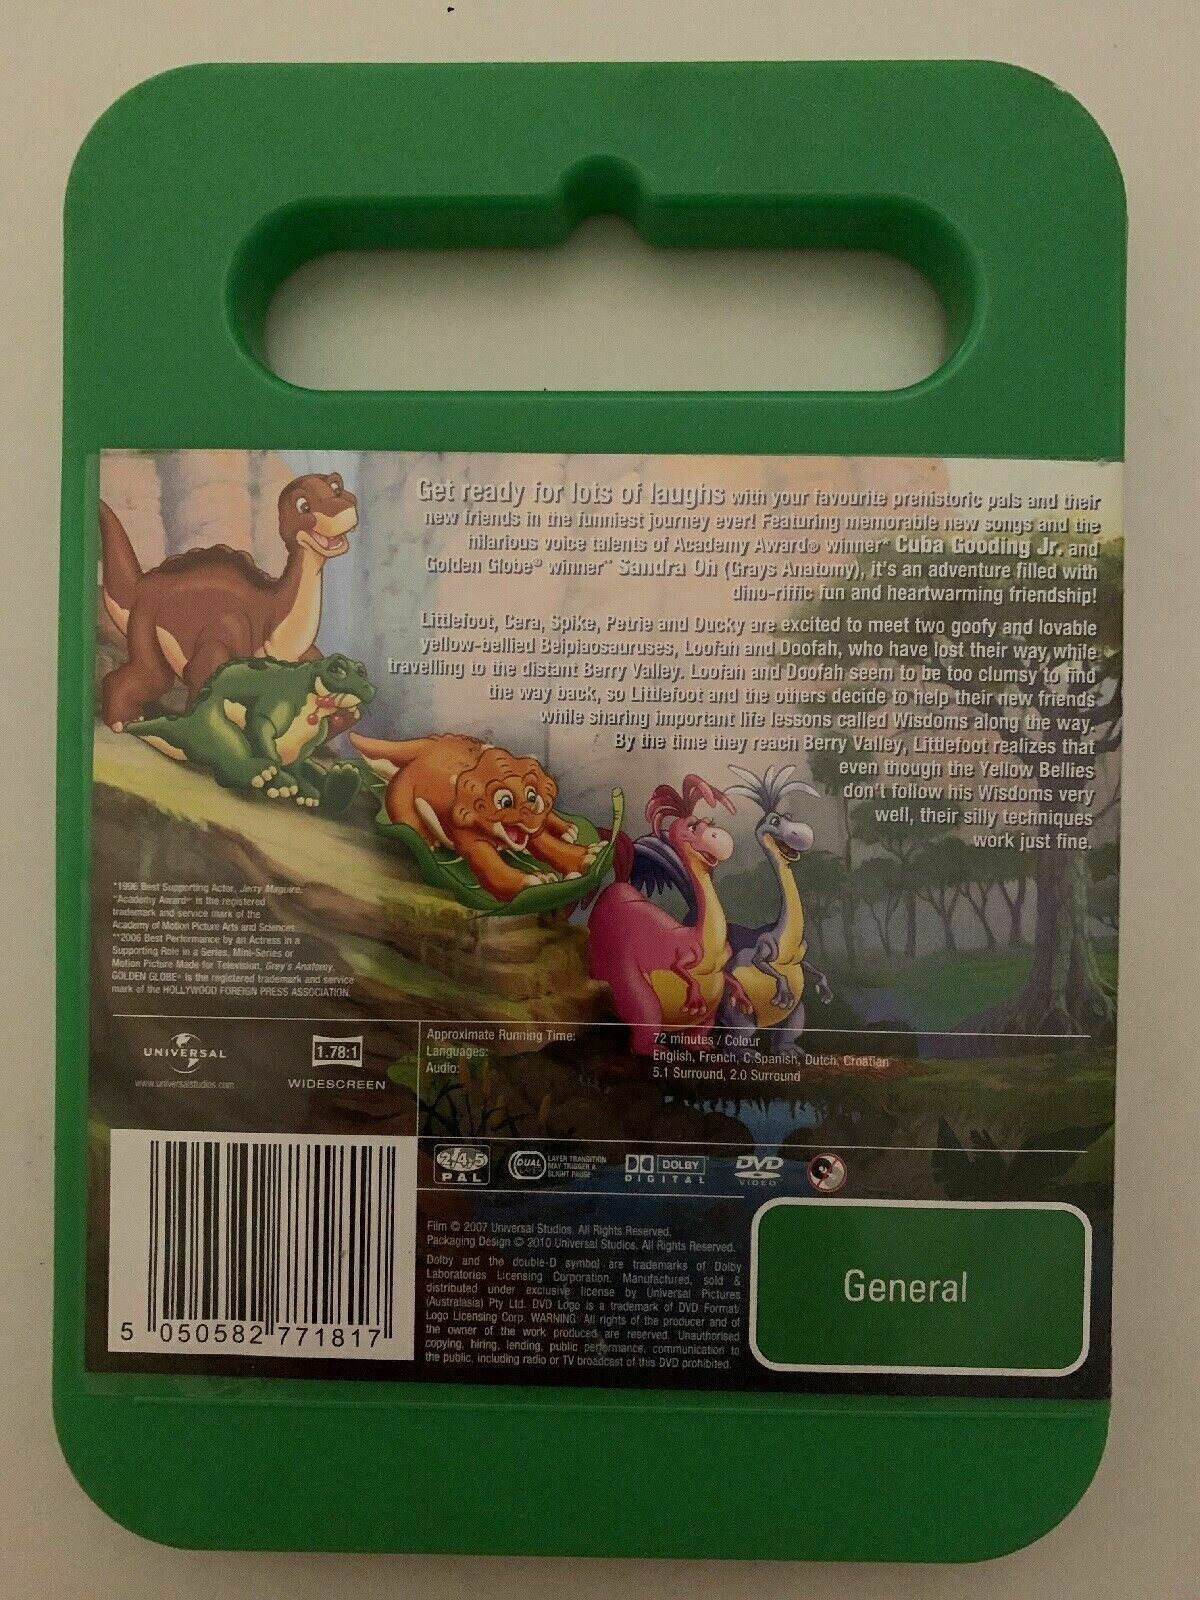 The Land Before Time - Wisdom Of Friends (DVD)